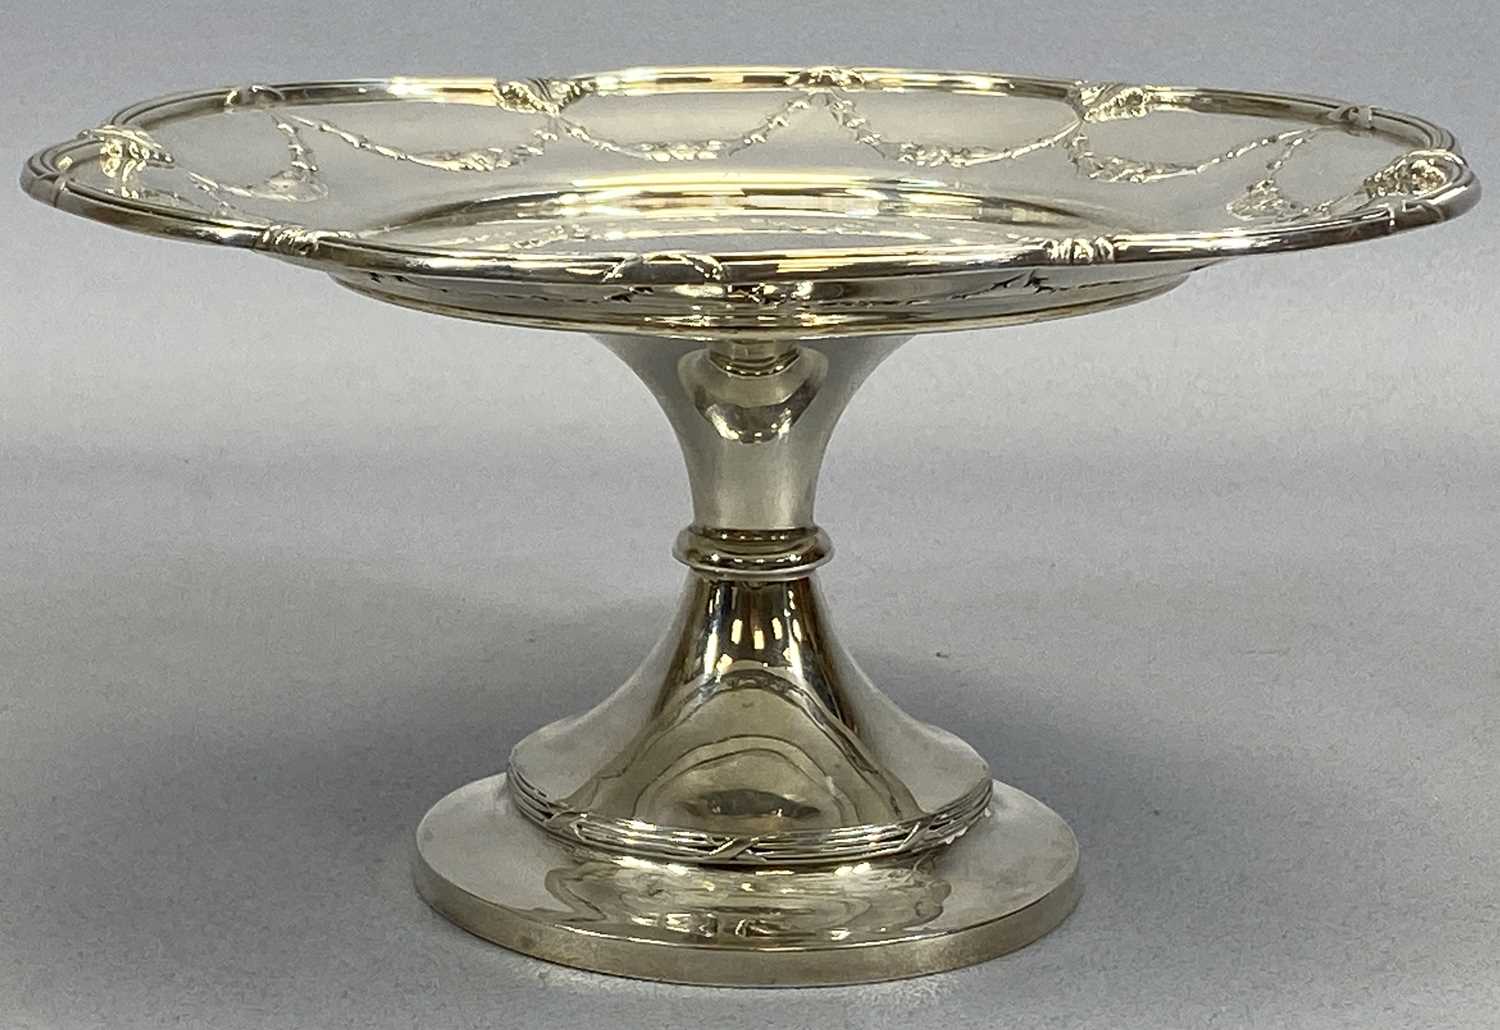 SILVER TAZZA the lobed outer rim with bound reeded details and an inner band of embossed floral - Image 2 of 4